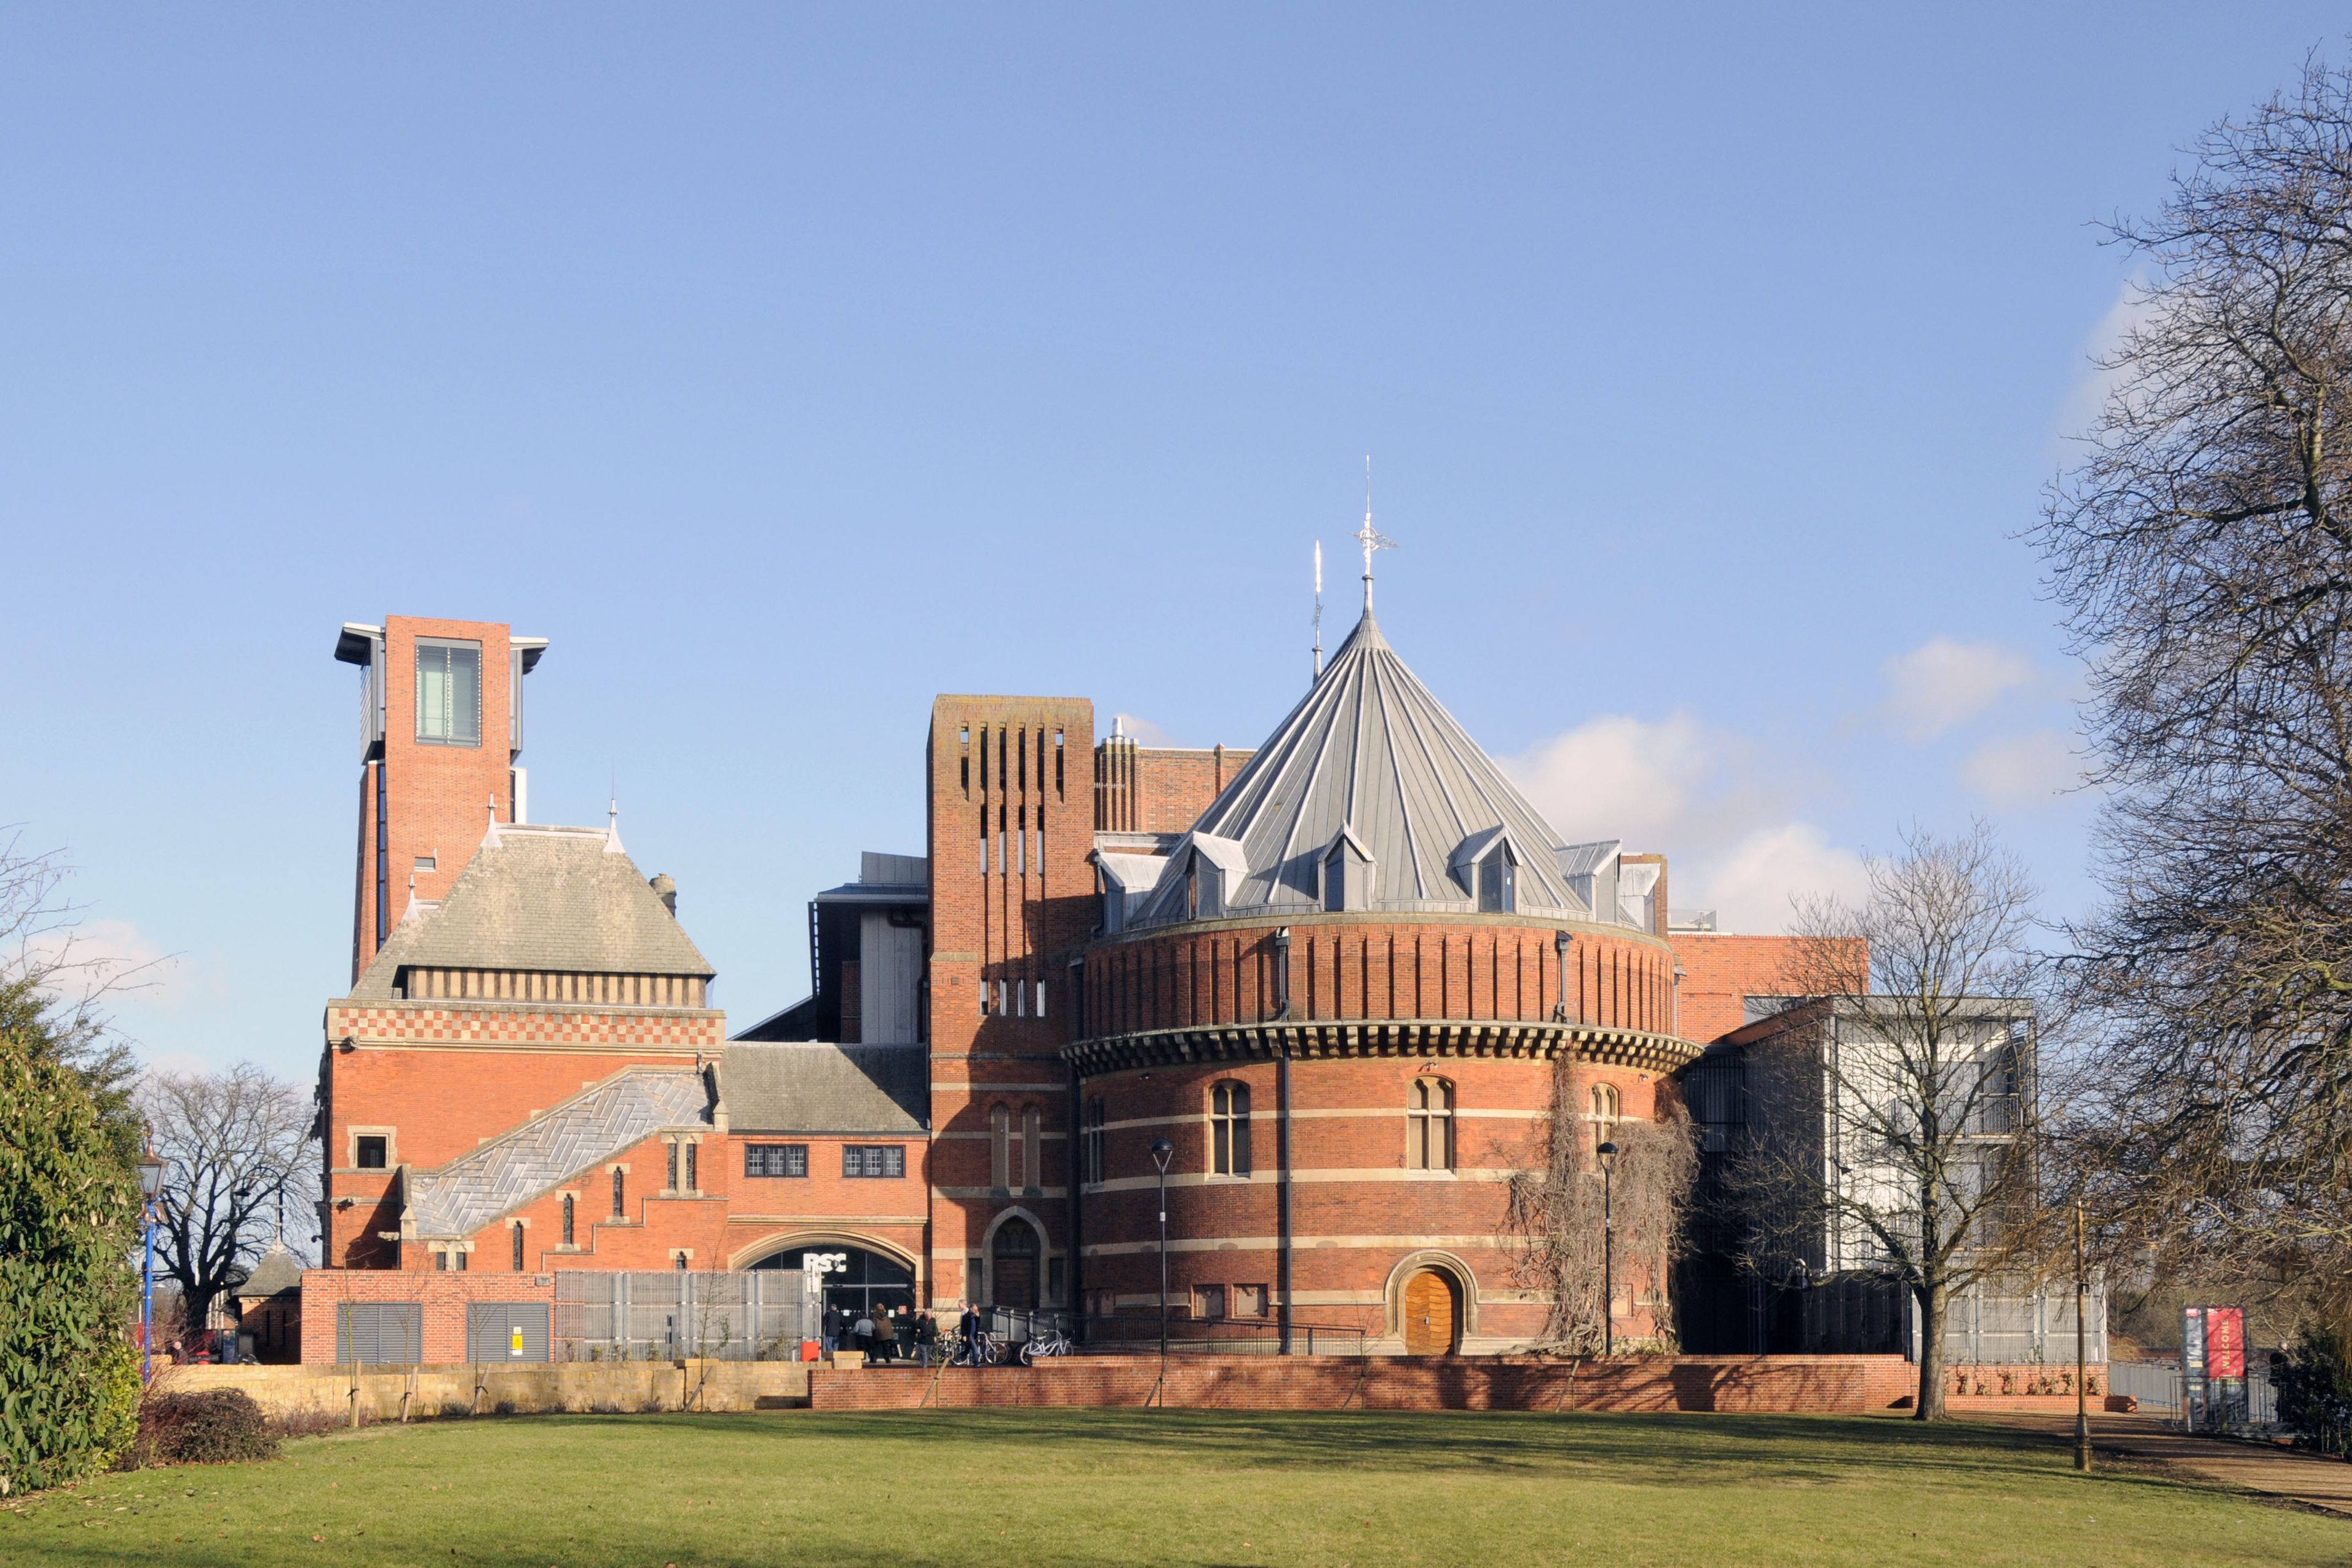 Royal Shakespeare Theatre in the UK